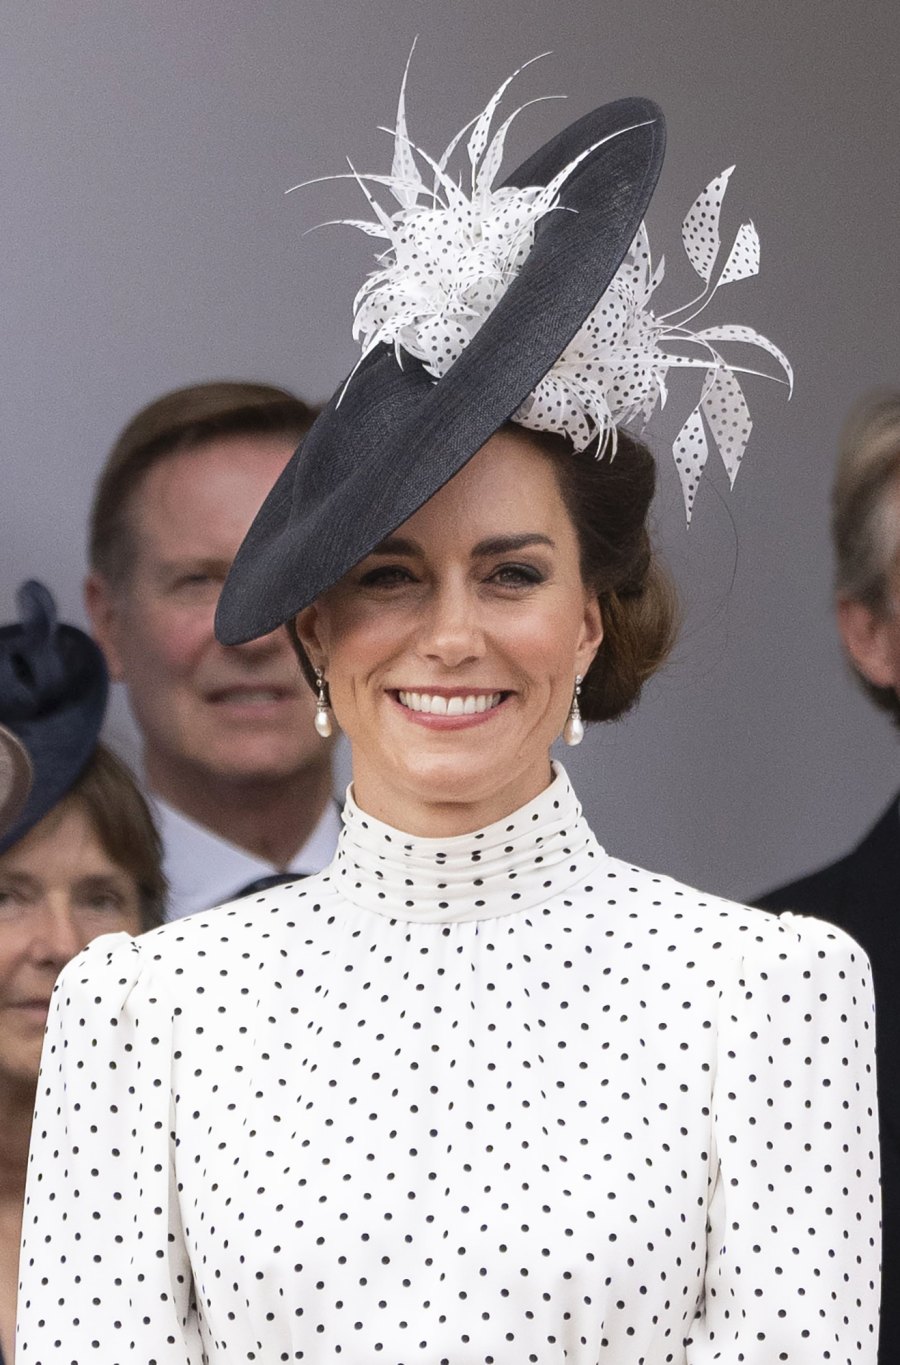 Princess Kate Looks Radiant in White While Attending the Order of the Garter Service